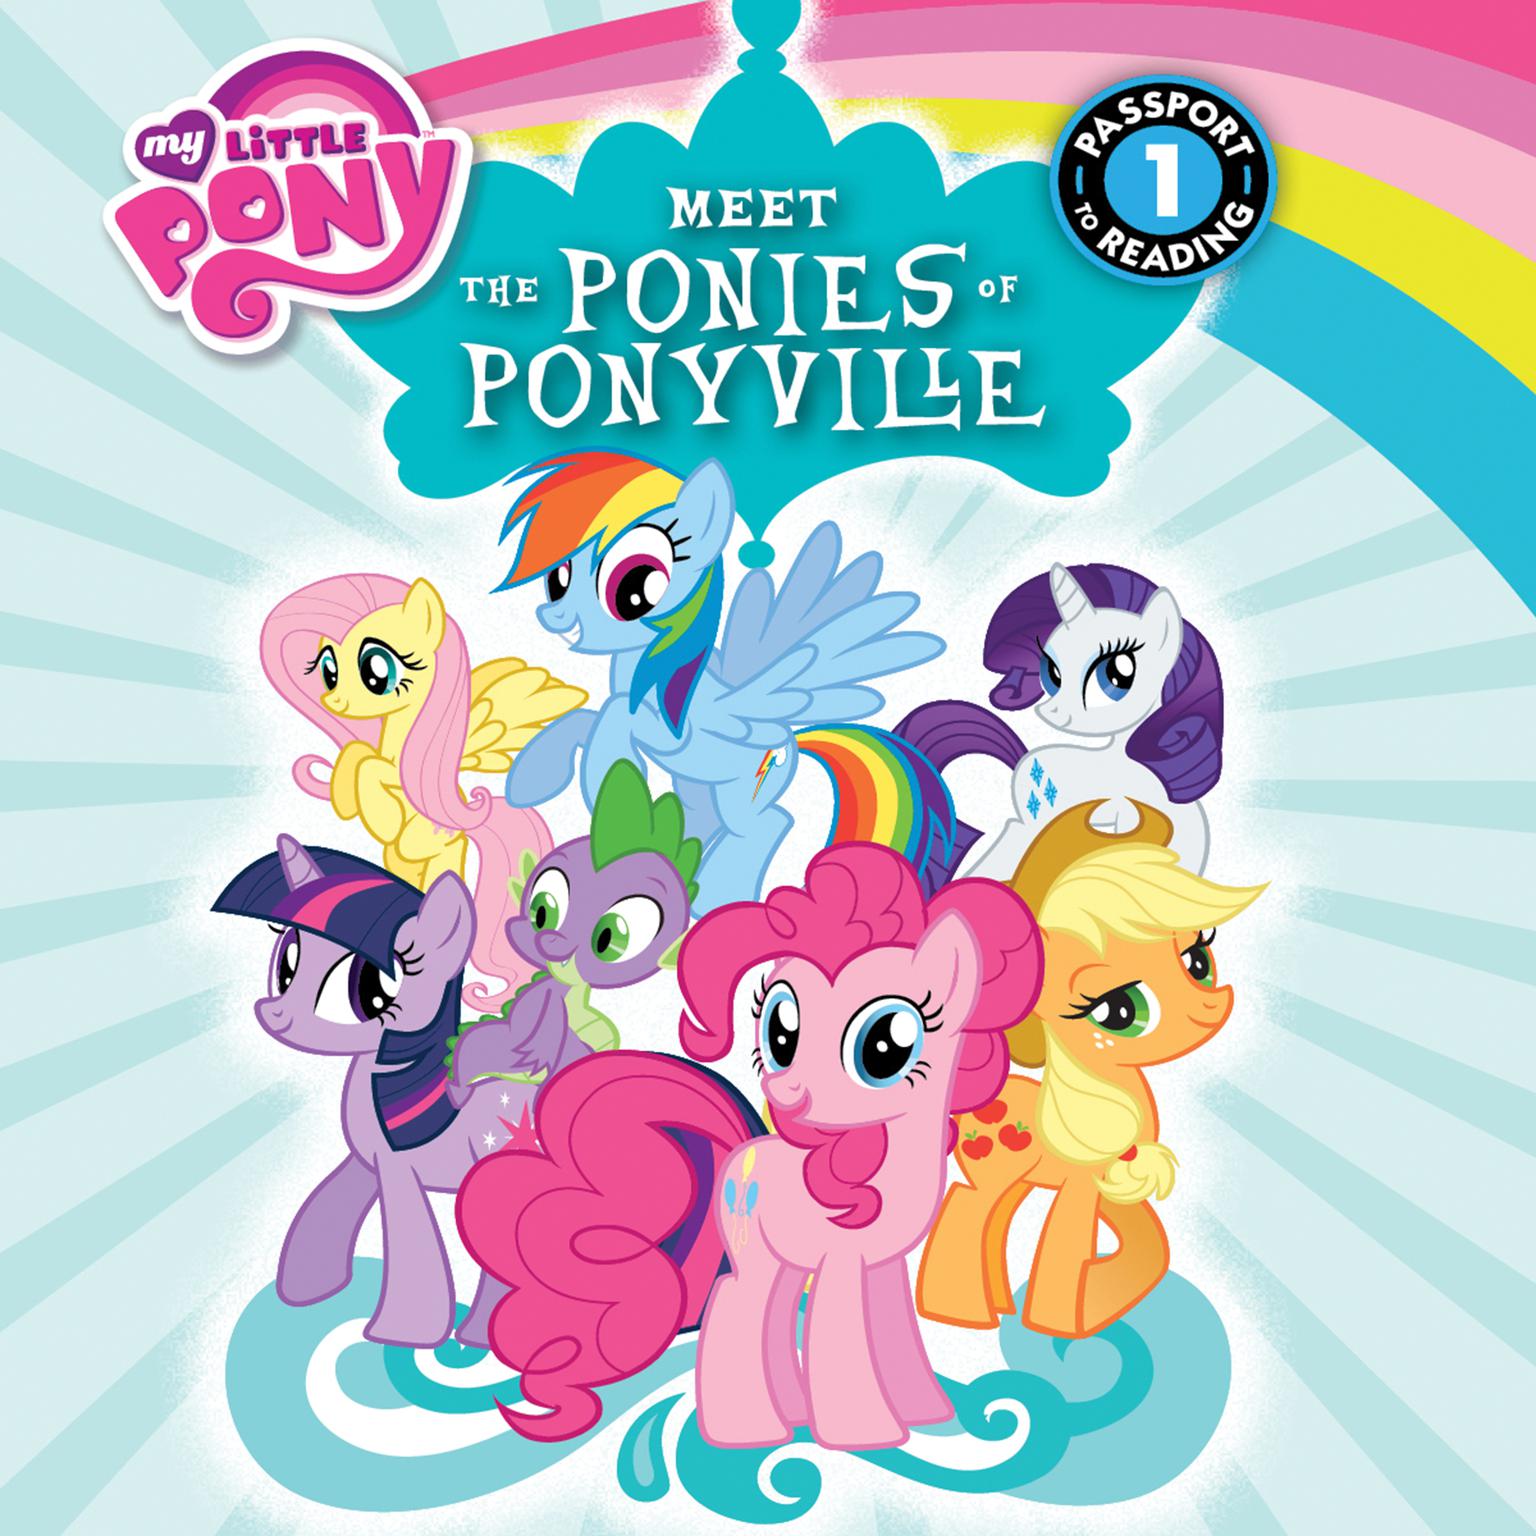 My Little Pony: Meet the Ponies of Ponyville: Level 1 Audiobook, by Olivia London